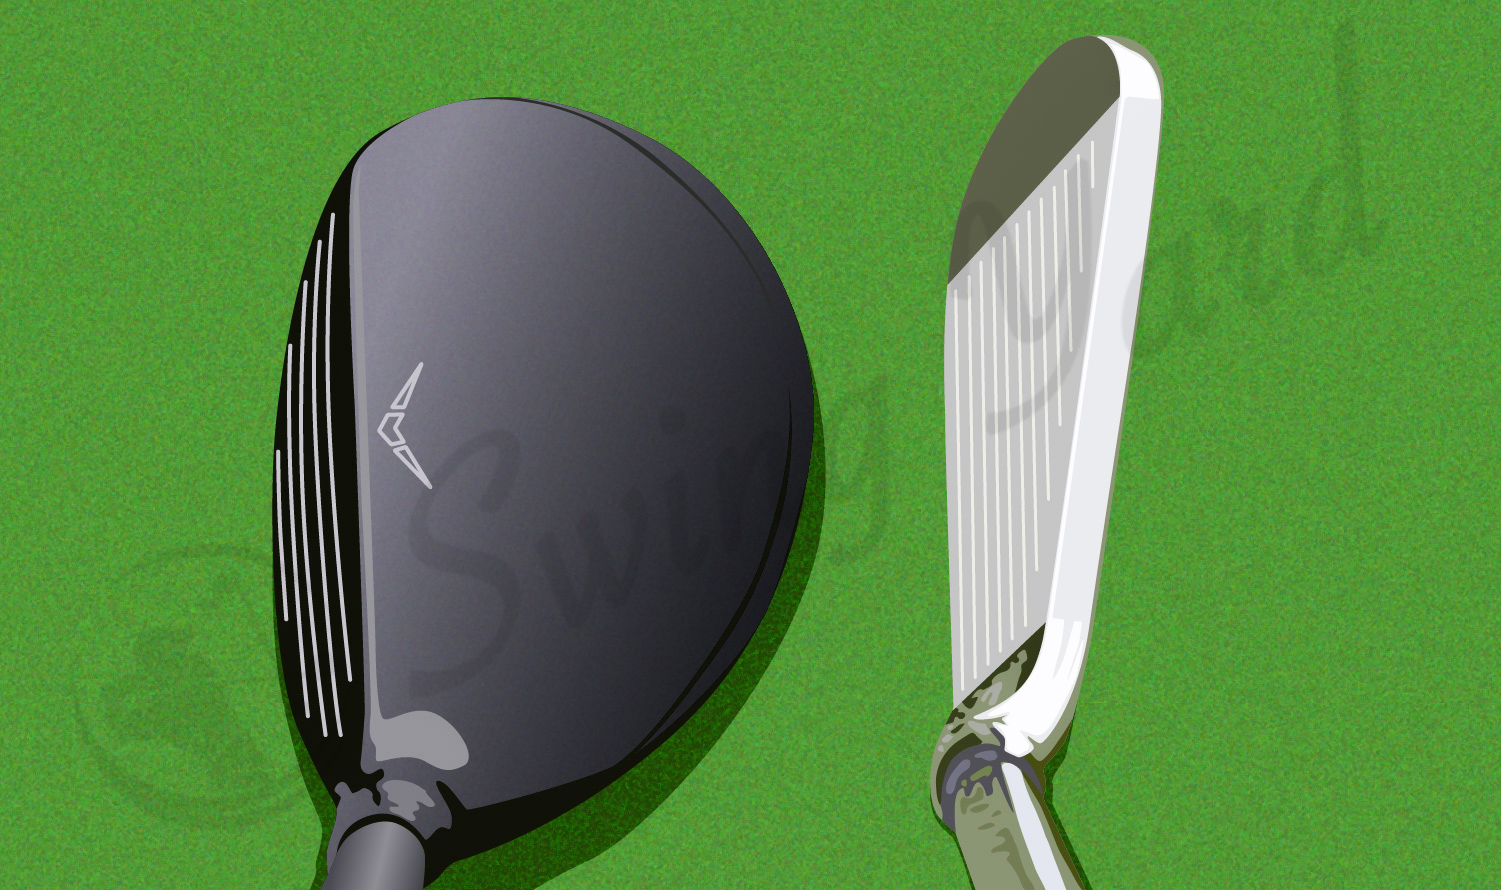 Women's iron compared to a fairway wood